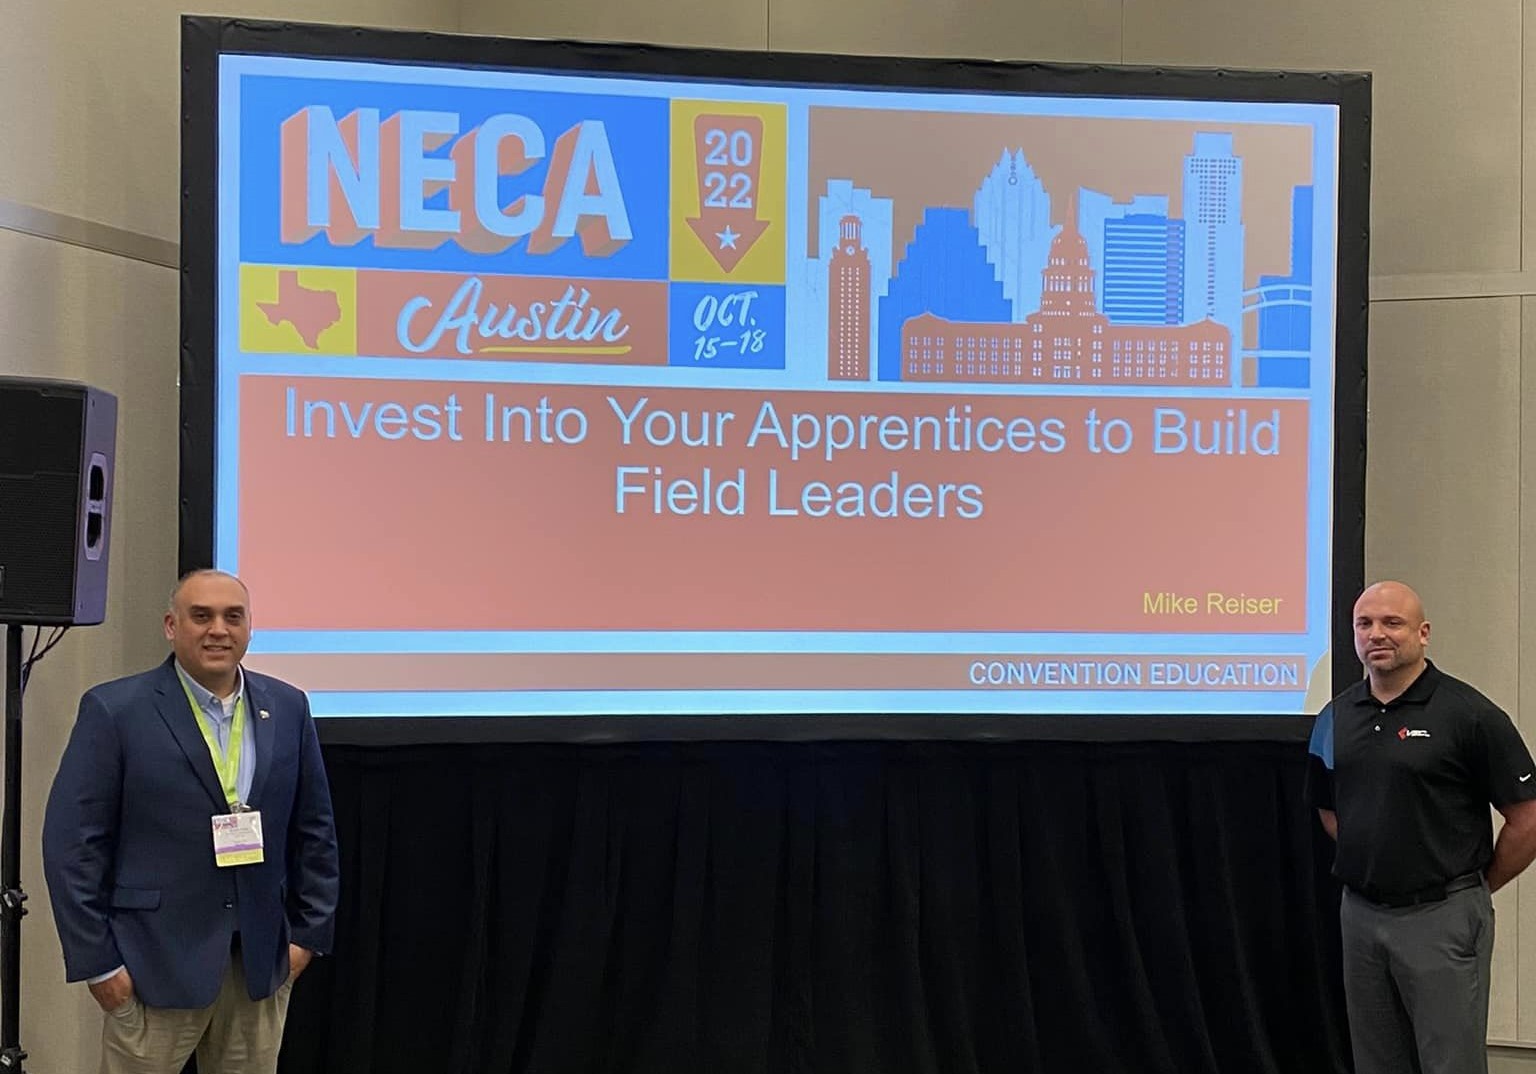 VEC provides voice of “Apprentices as Future Leaders” at NECA